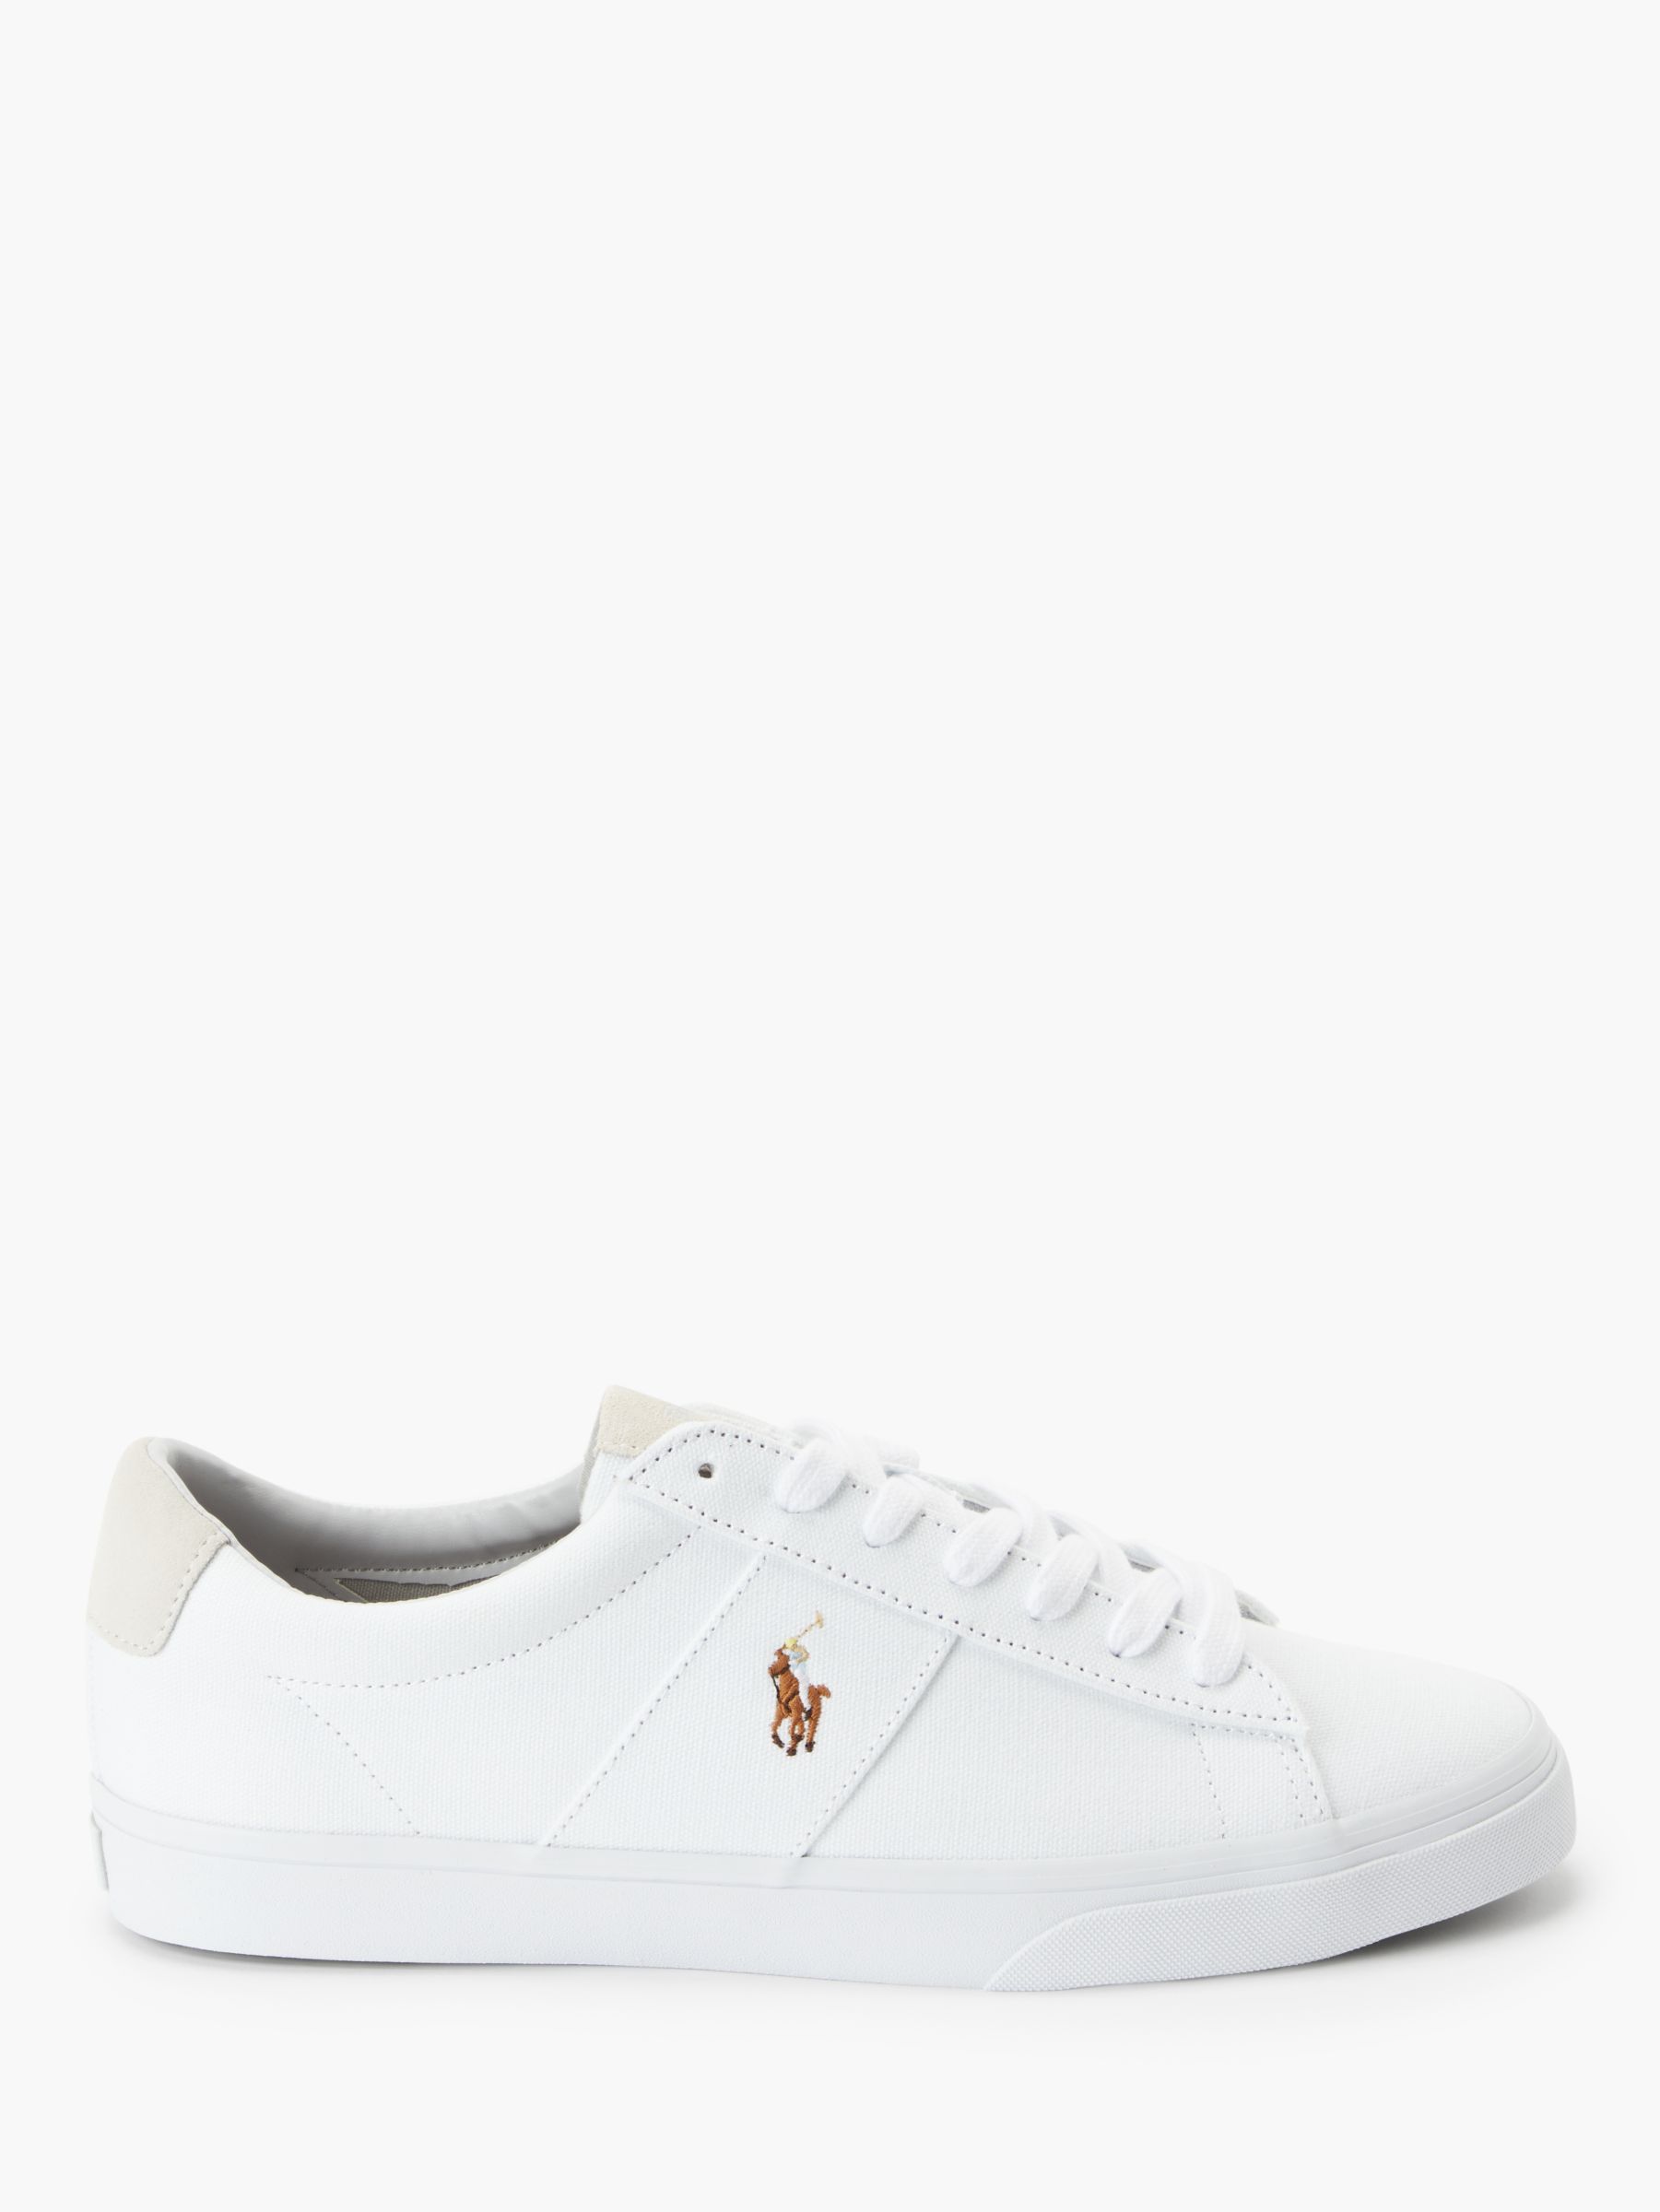 Polo Ralph Lauren Sayer Canvas Trainers at John Lewis & Partners